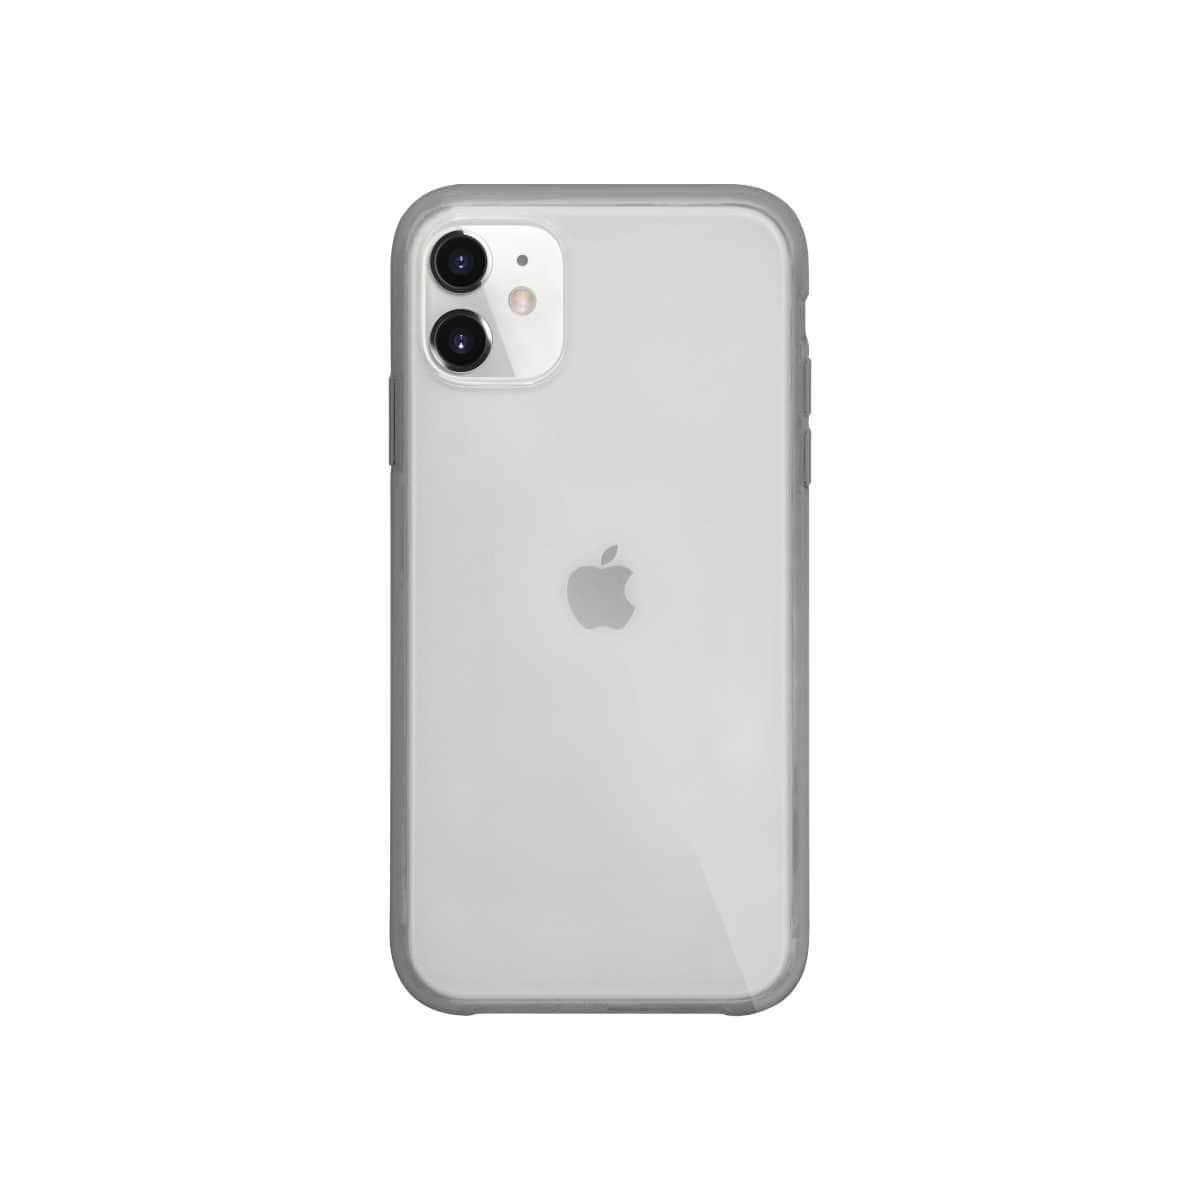 iguard by porodo fashion clear case for iphone 11 clear